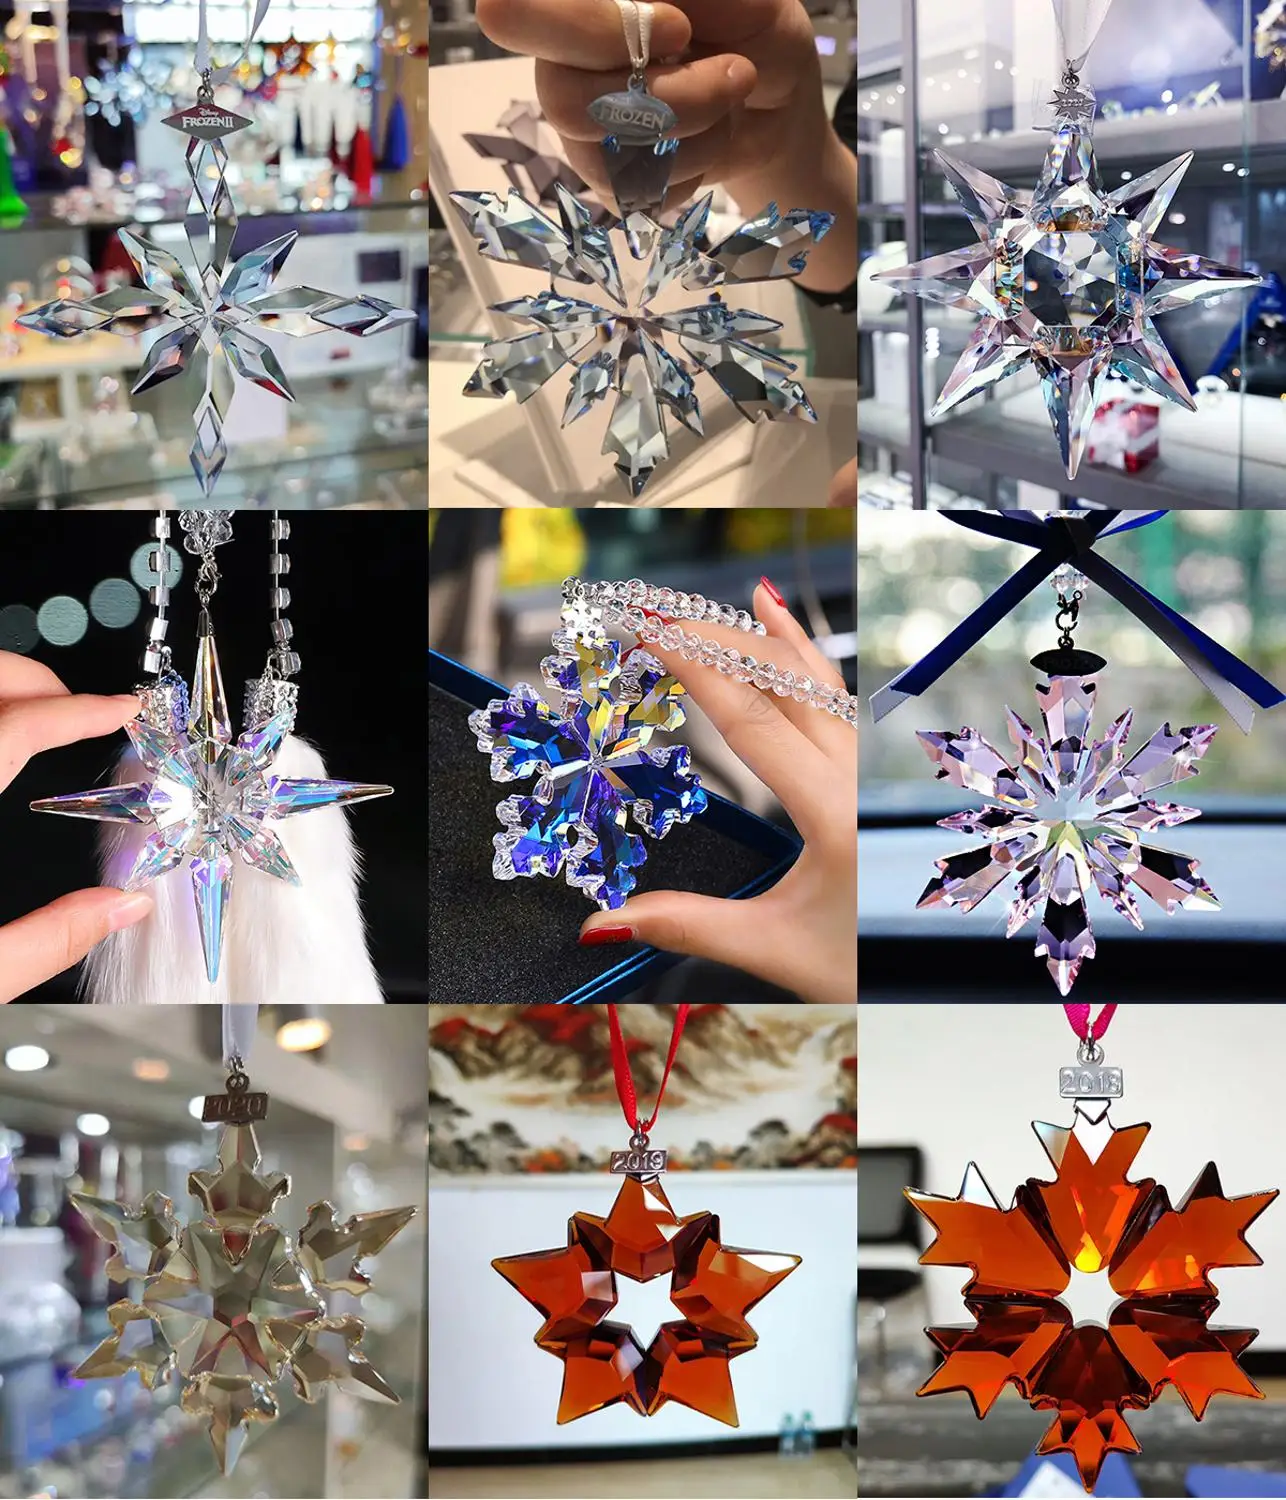 Exquisite Colorful Crystal Snowflakes Car Pendant Charms Ornament Chandelier Sun Catcher Hanging Christmas Decoration Gift